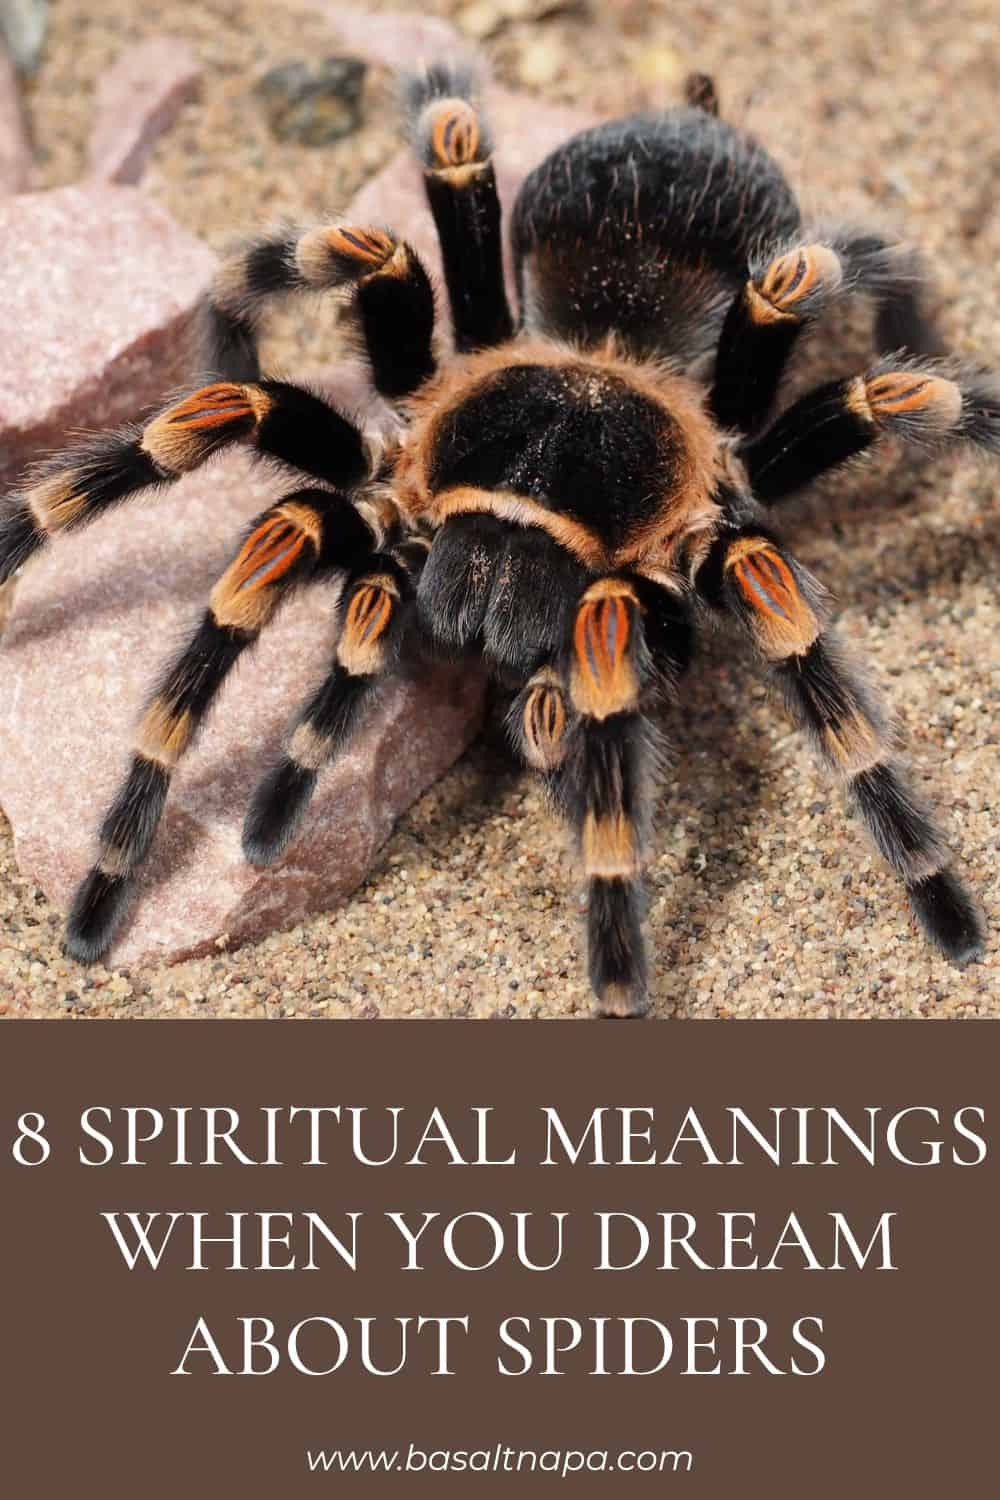 8 Spiritual Meanings When You Dream About Spiders